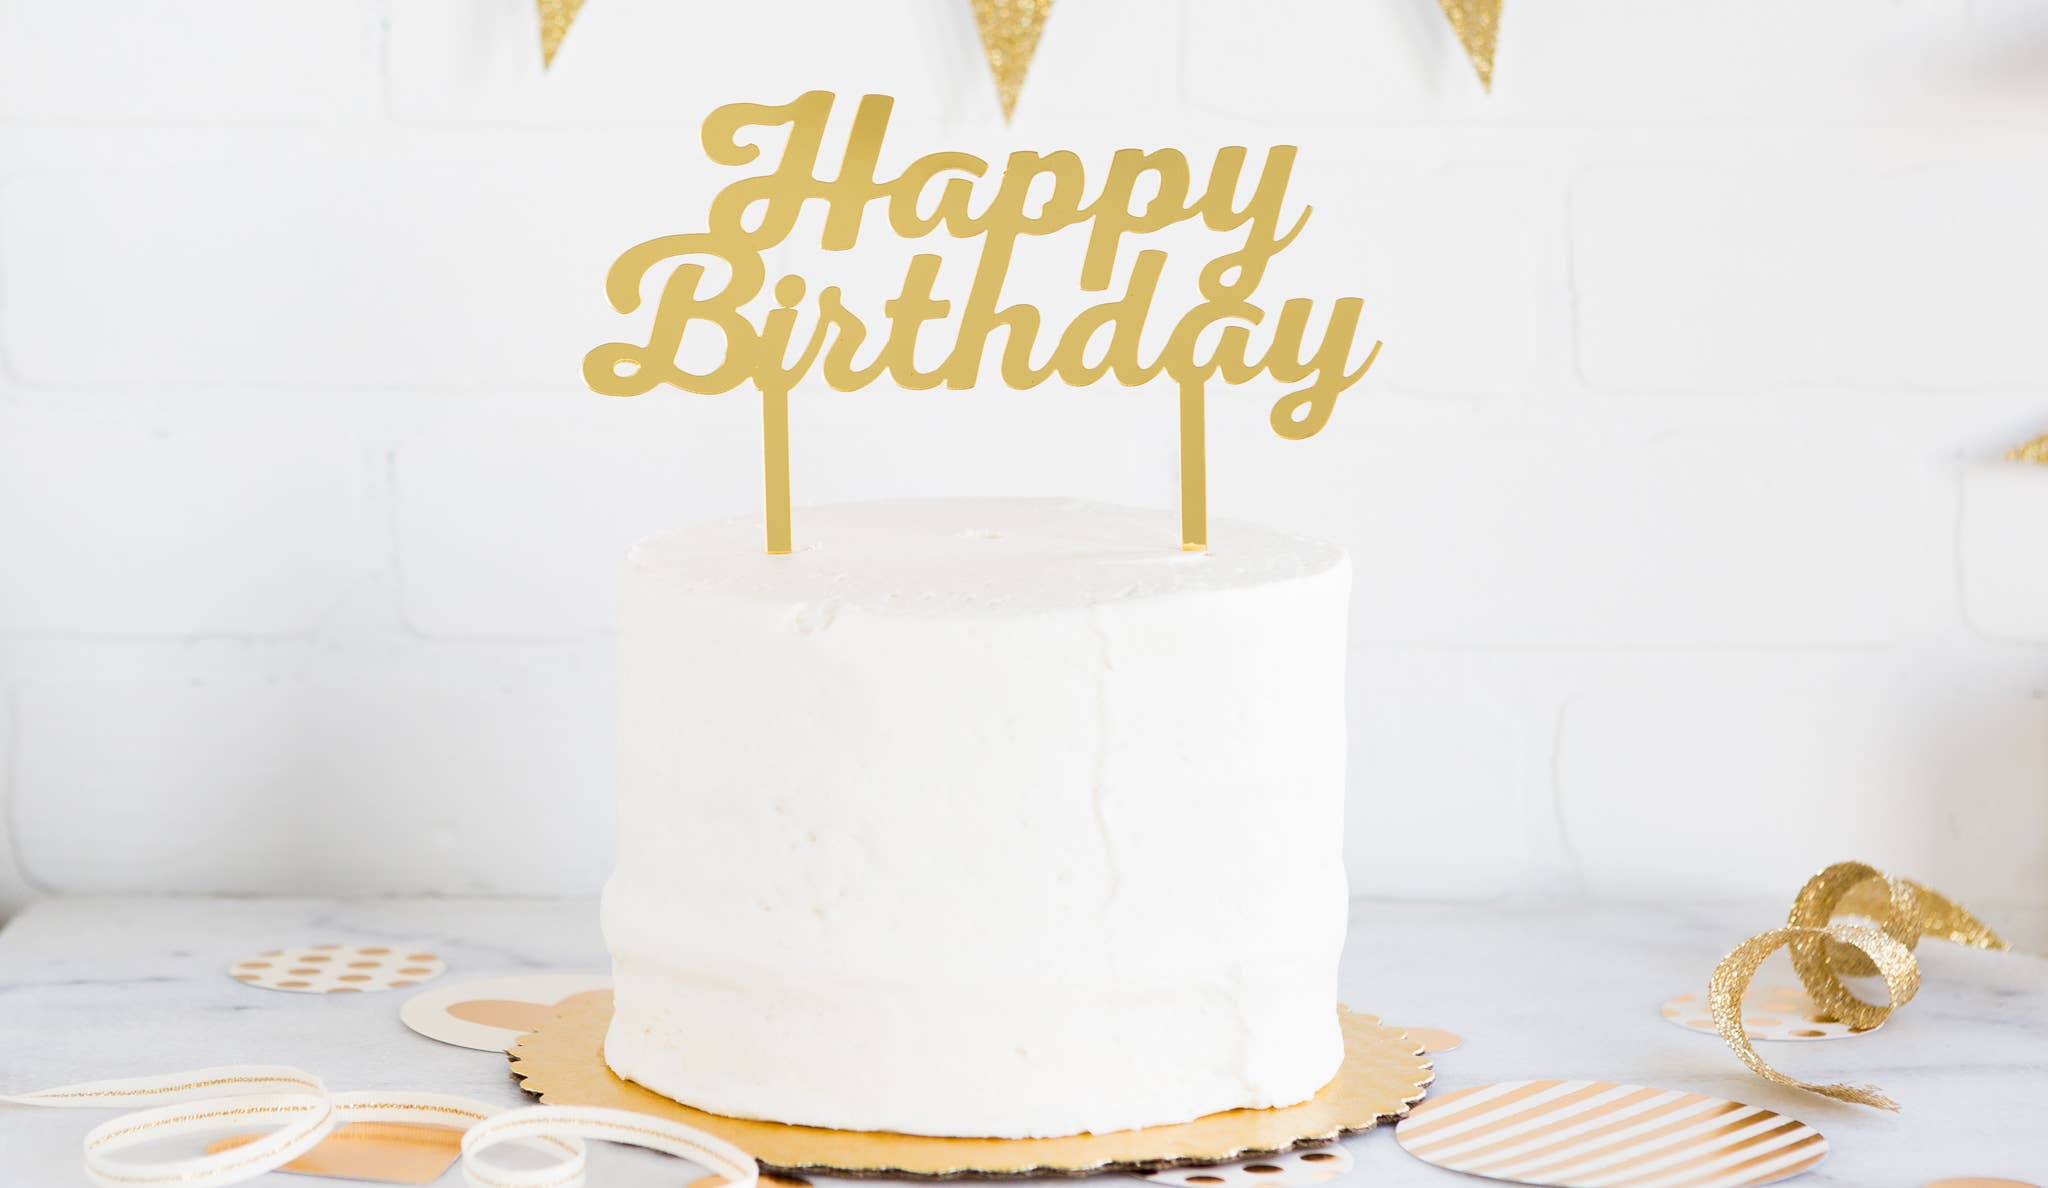 ⭐New Acrylic Gold Cake Topper for Happy Birthday Cake Decoration